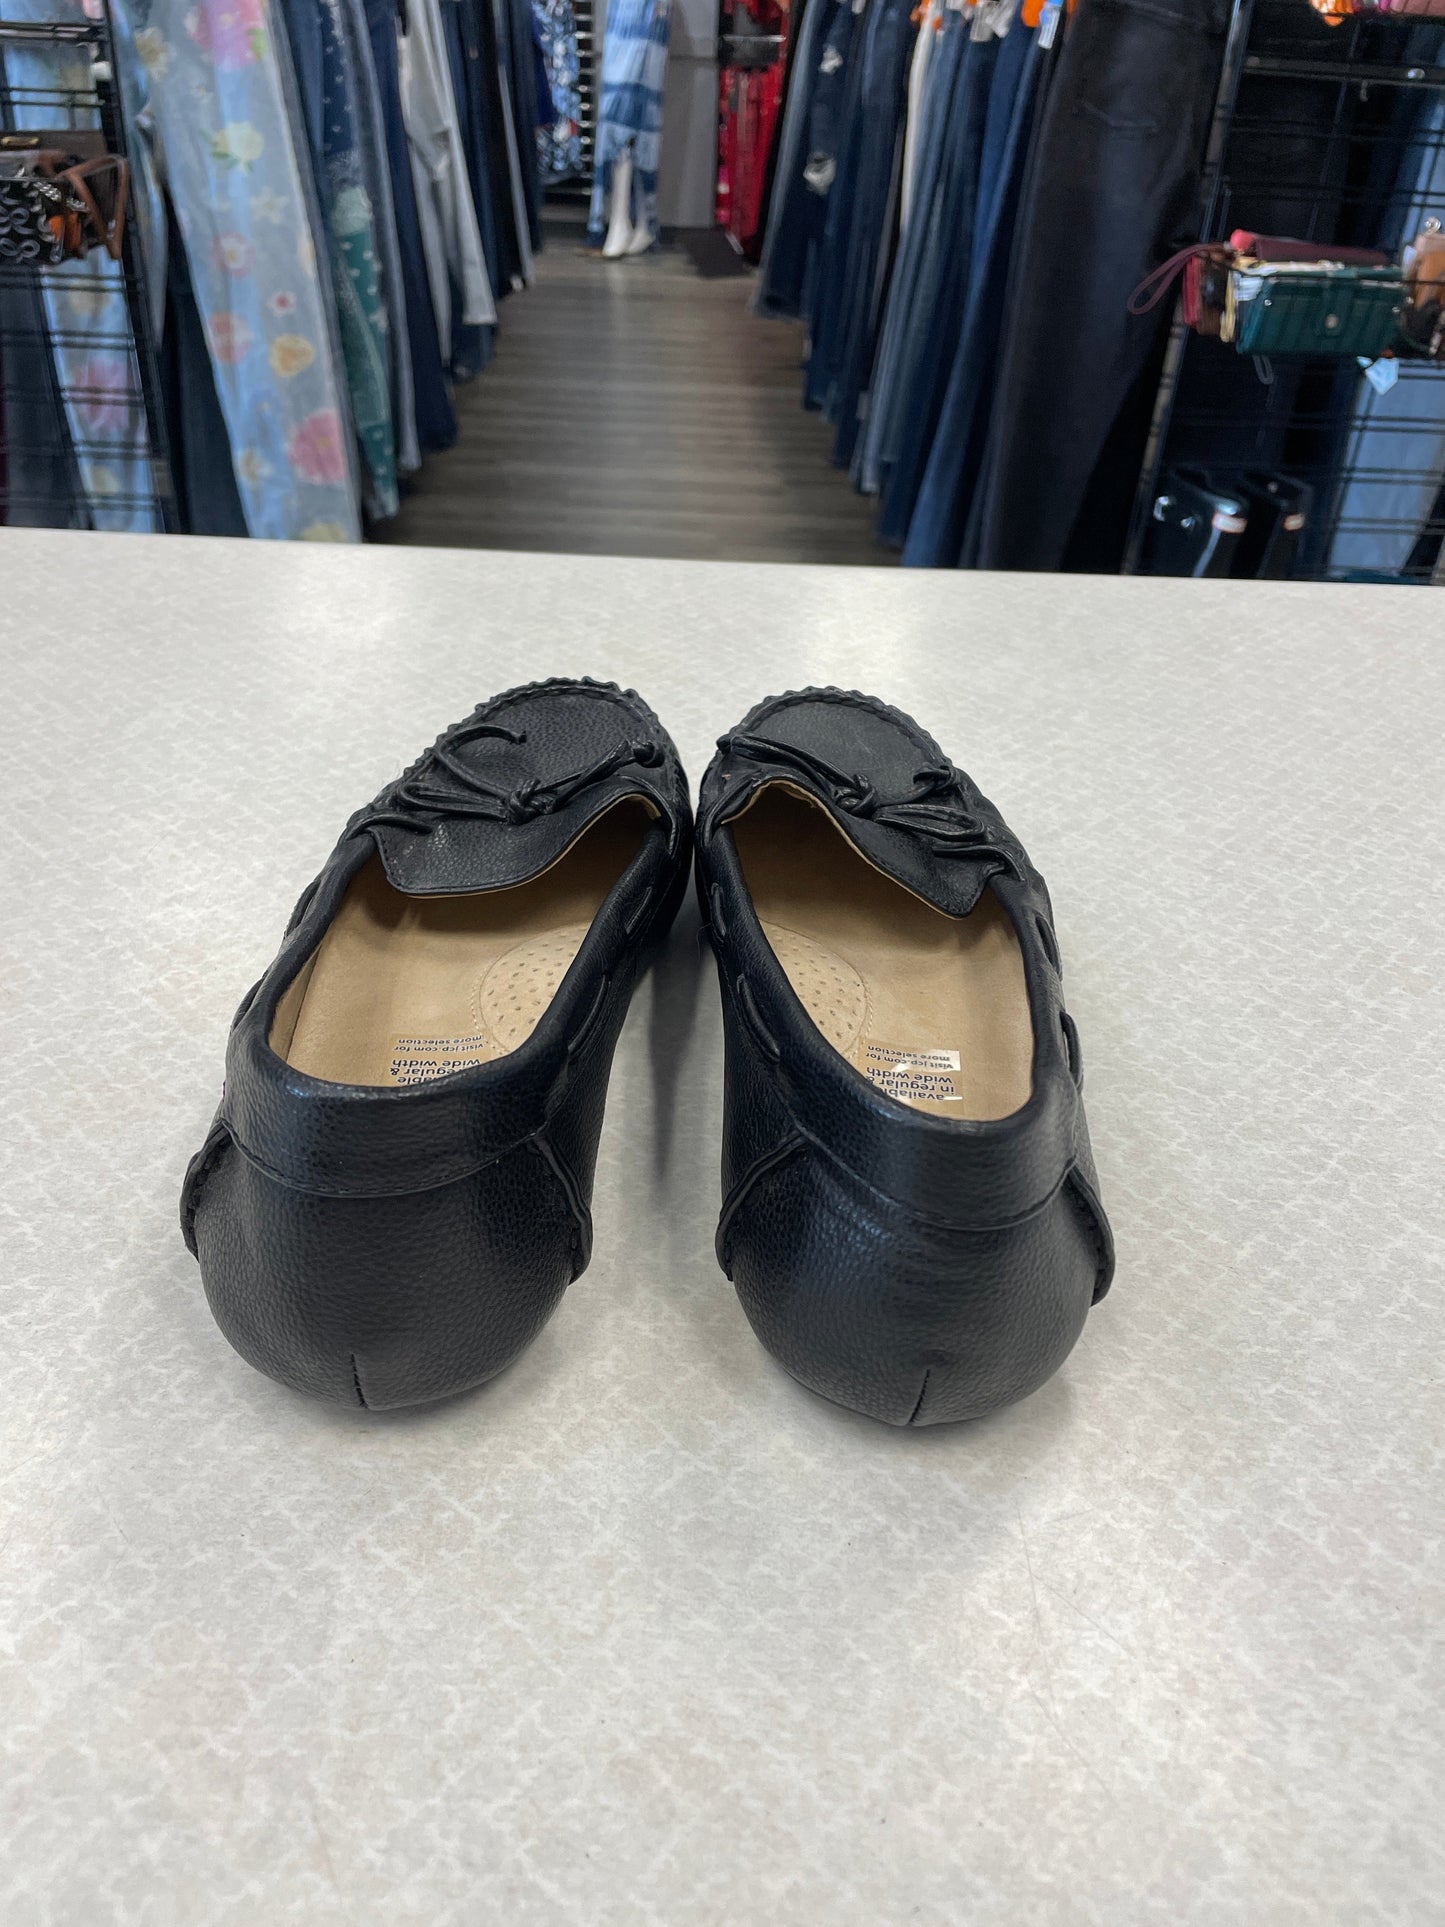 Shoes Flats By St Johns Bay  Size: 6.5